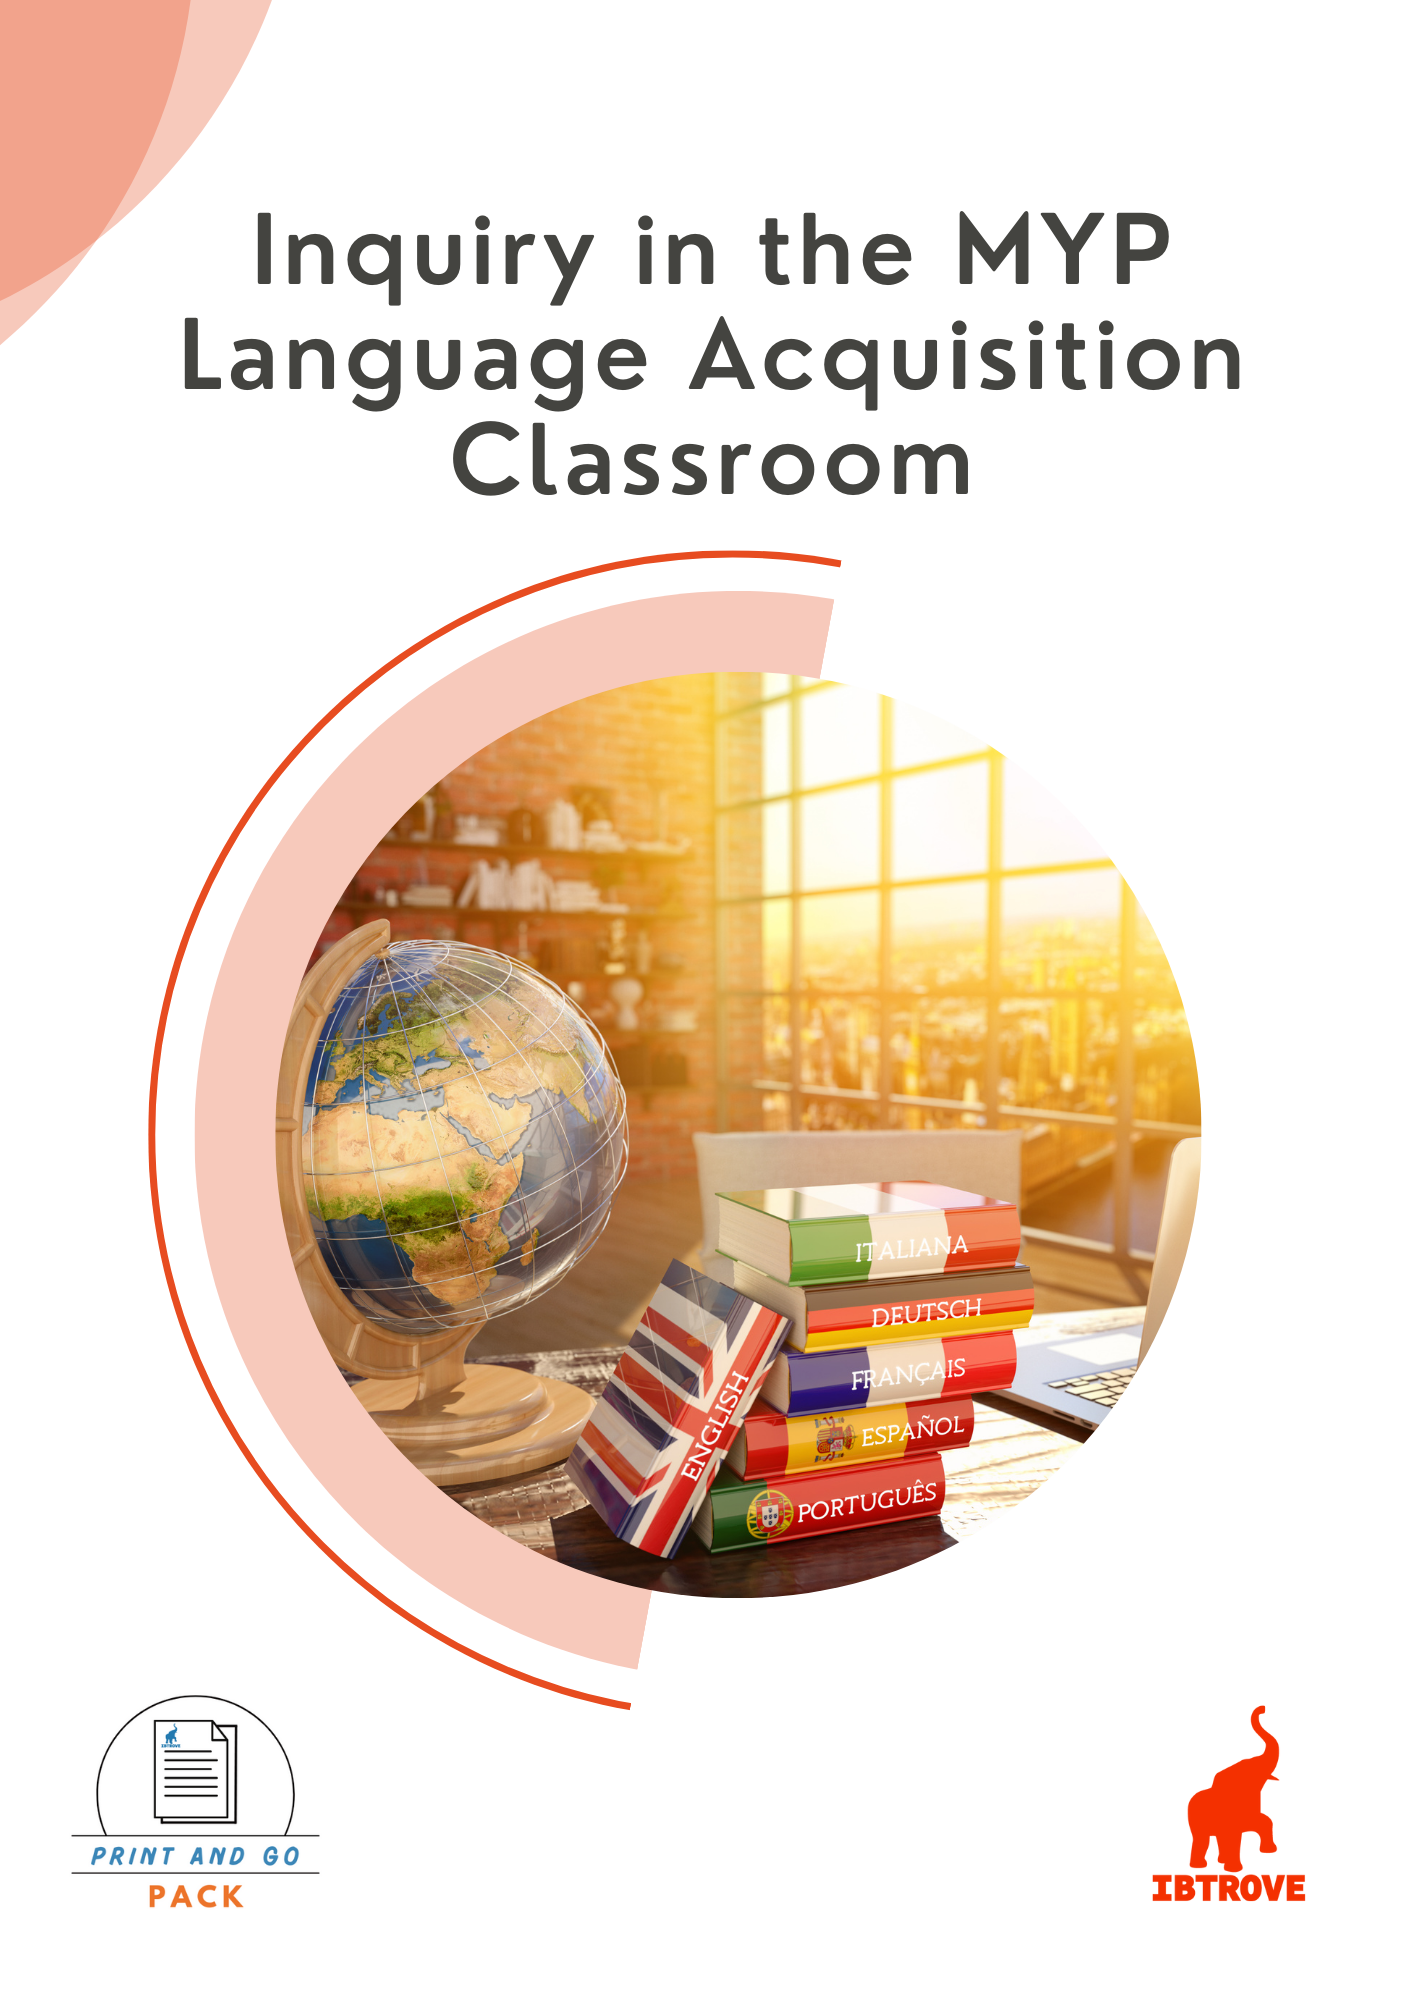 Inquiry in the MYP Language Acquisition Classroom (Print and Go Pack)